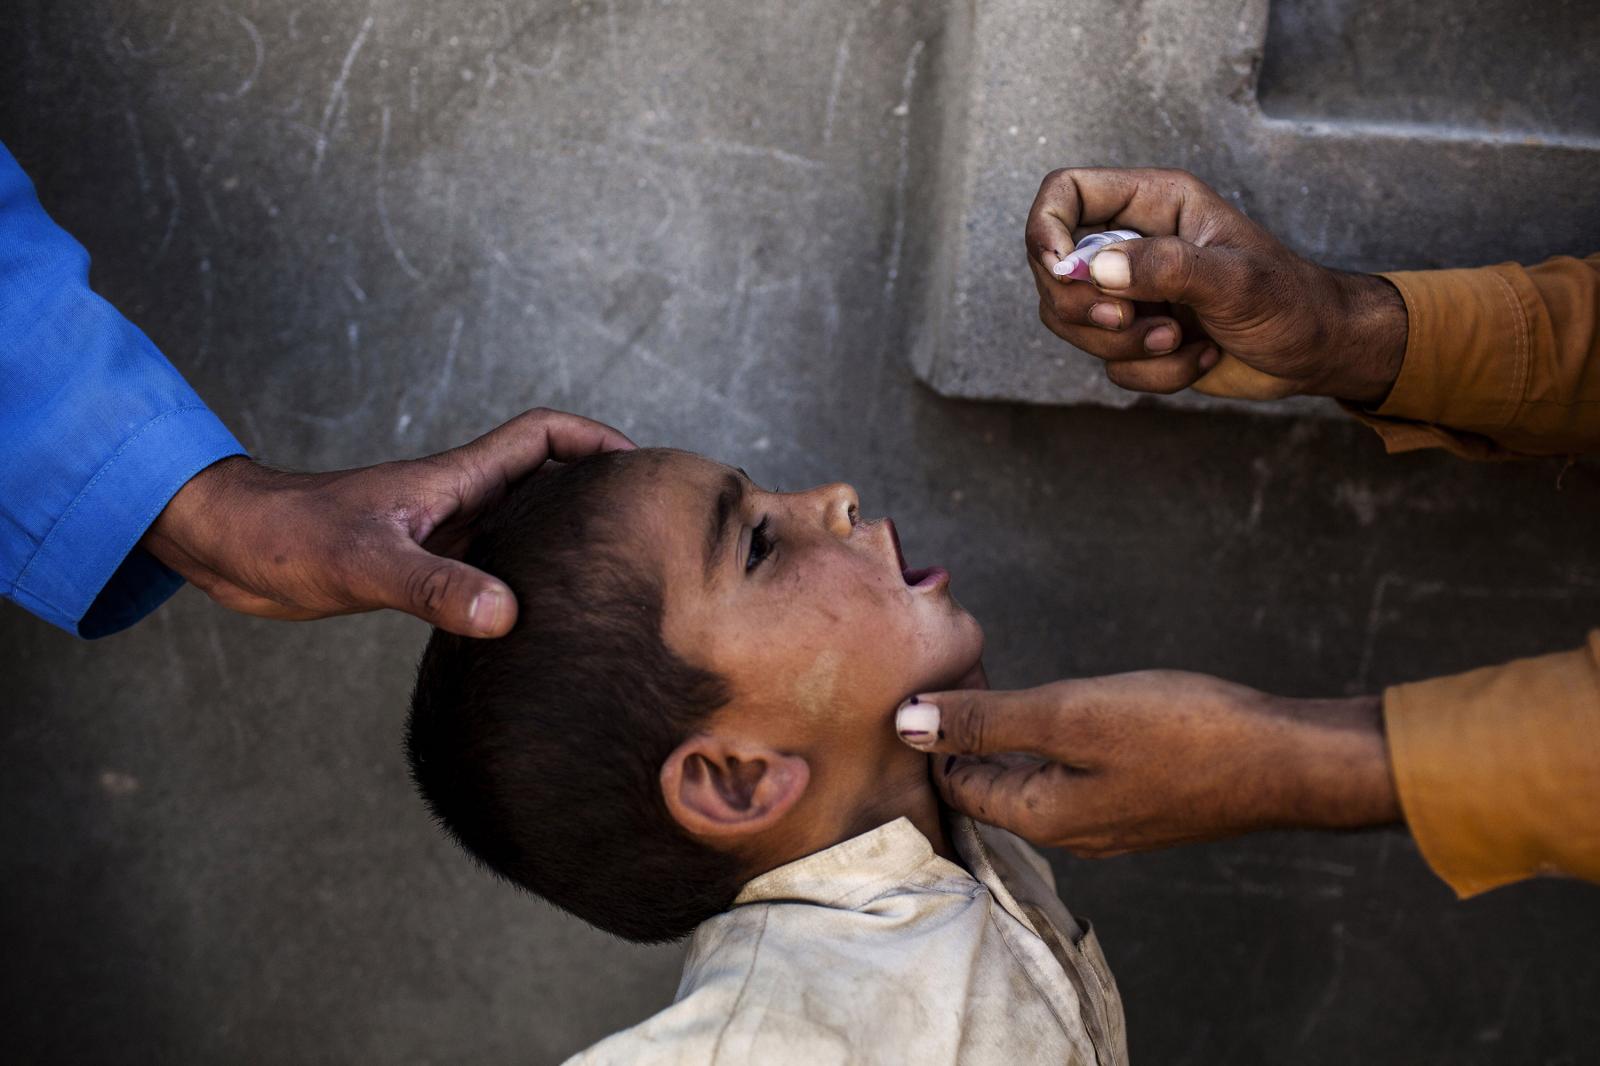 War on Polio - Health workers vaccinate a child in Afghanistan during...